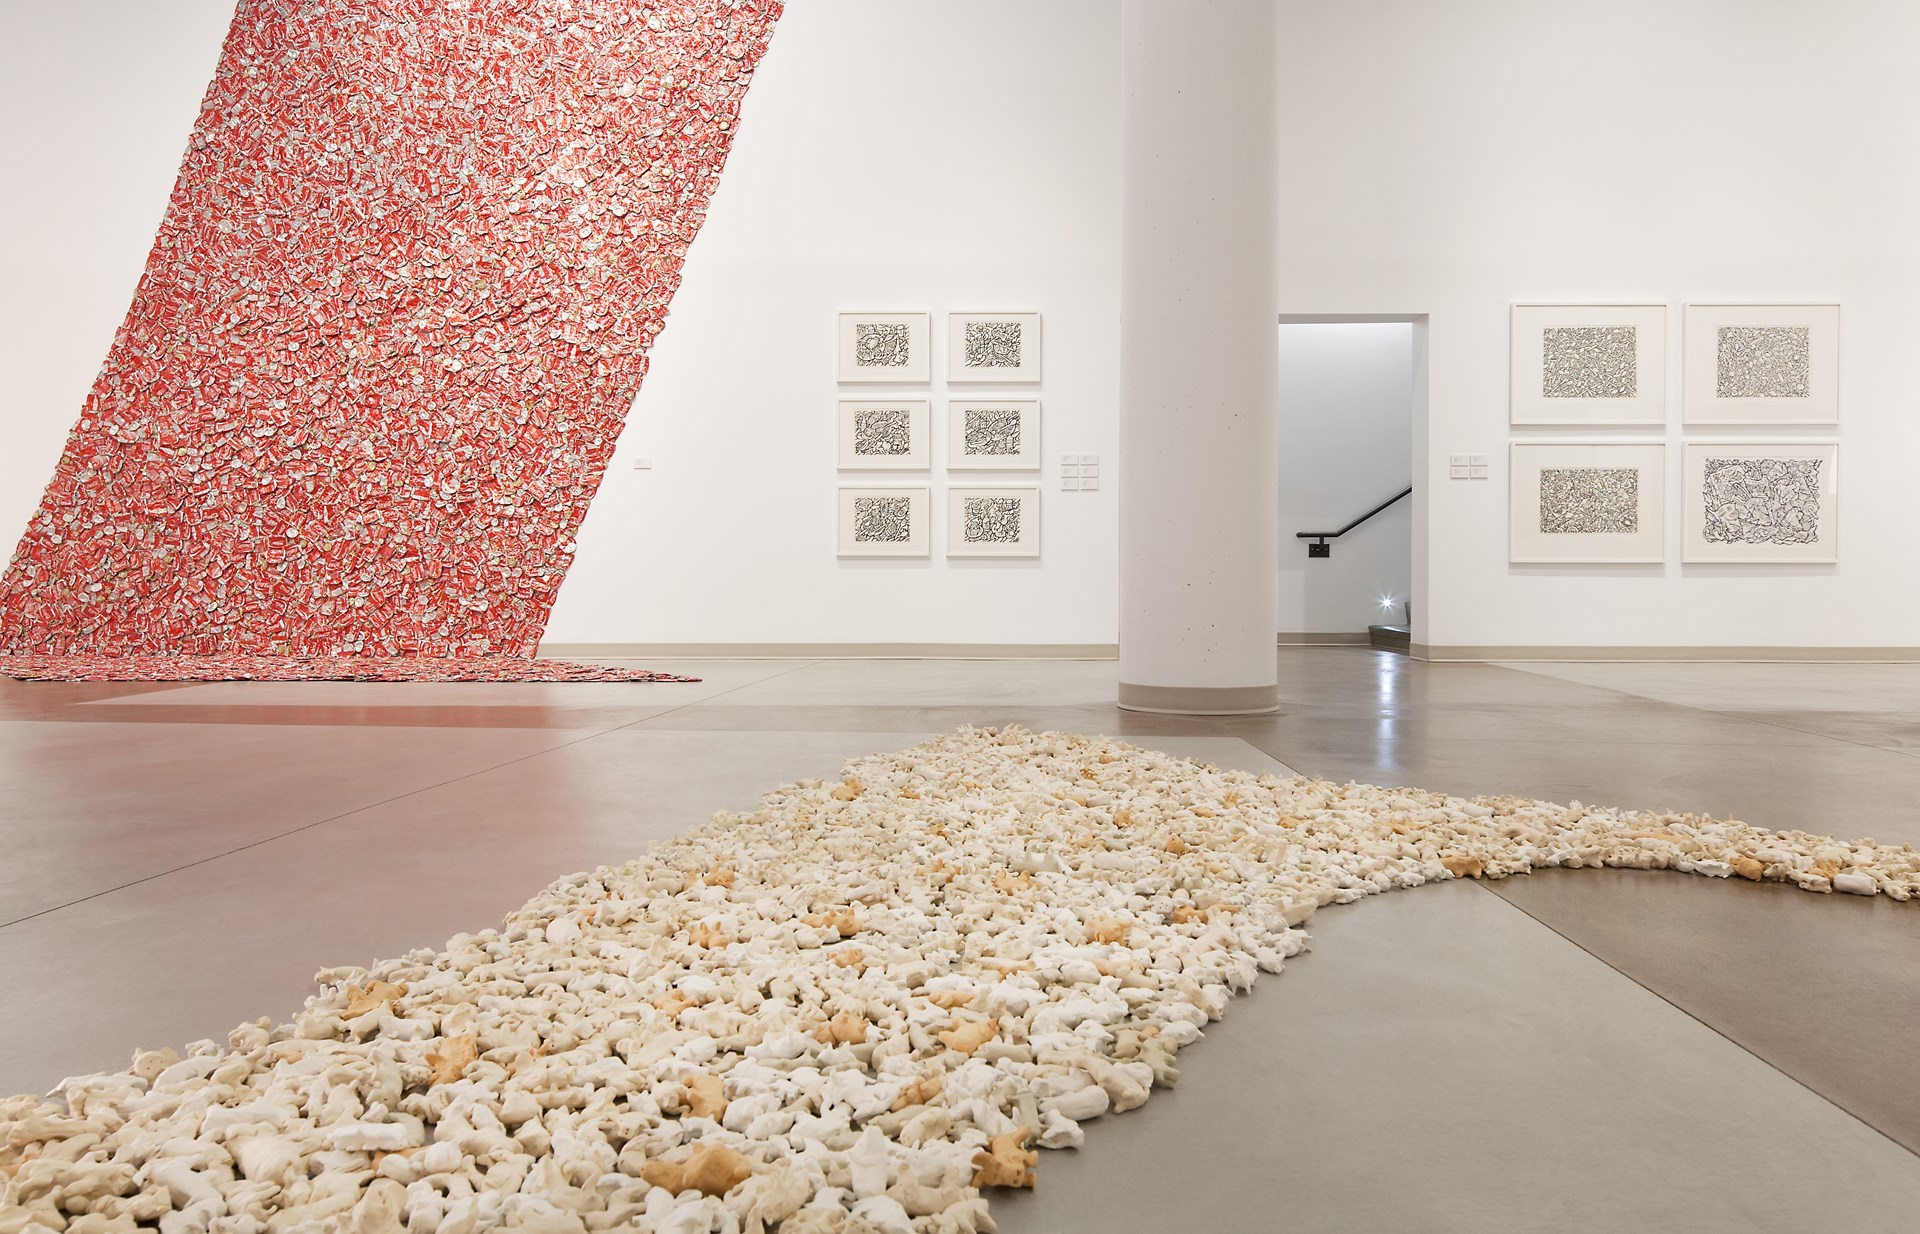 Gu Xiong-a journey exposed-installation view2.jpg